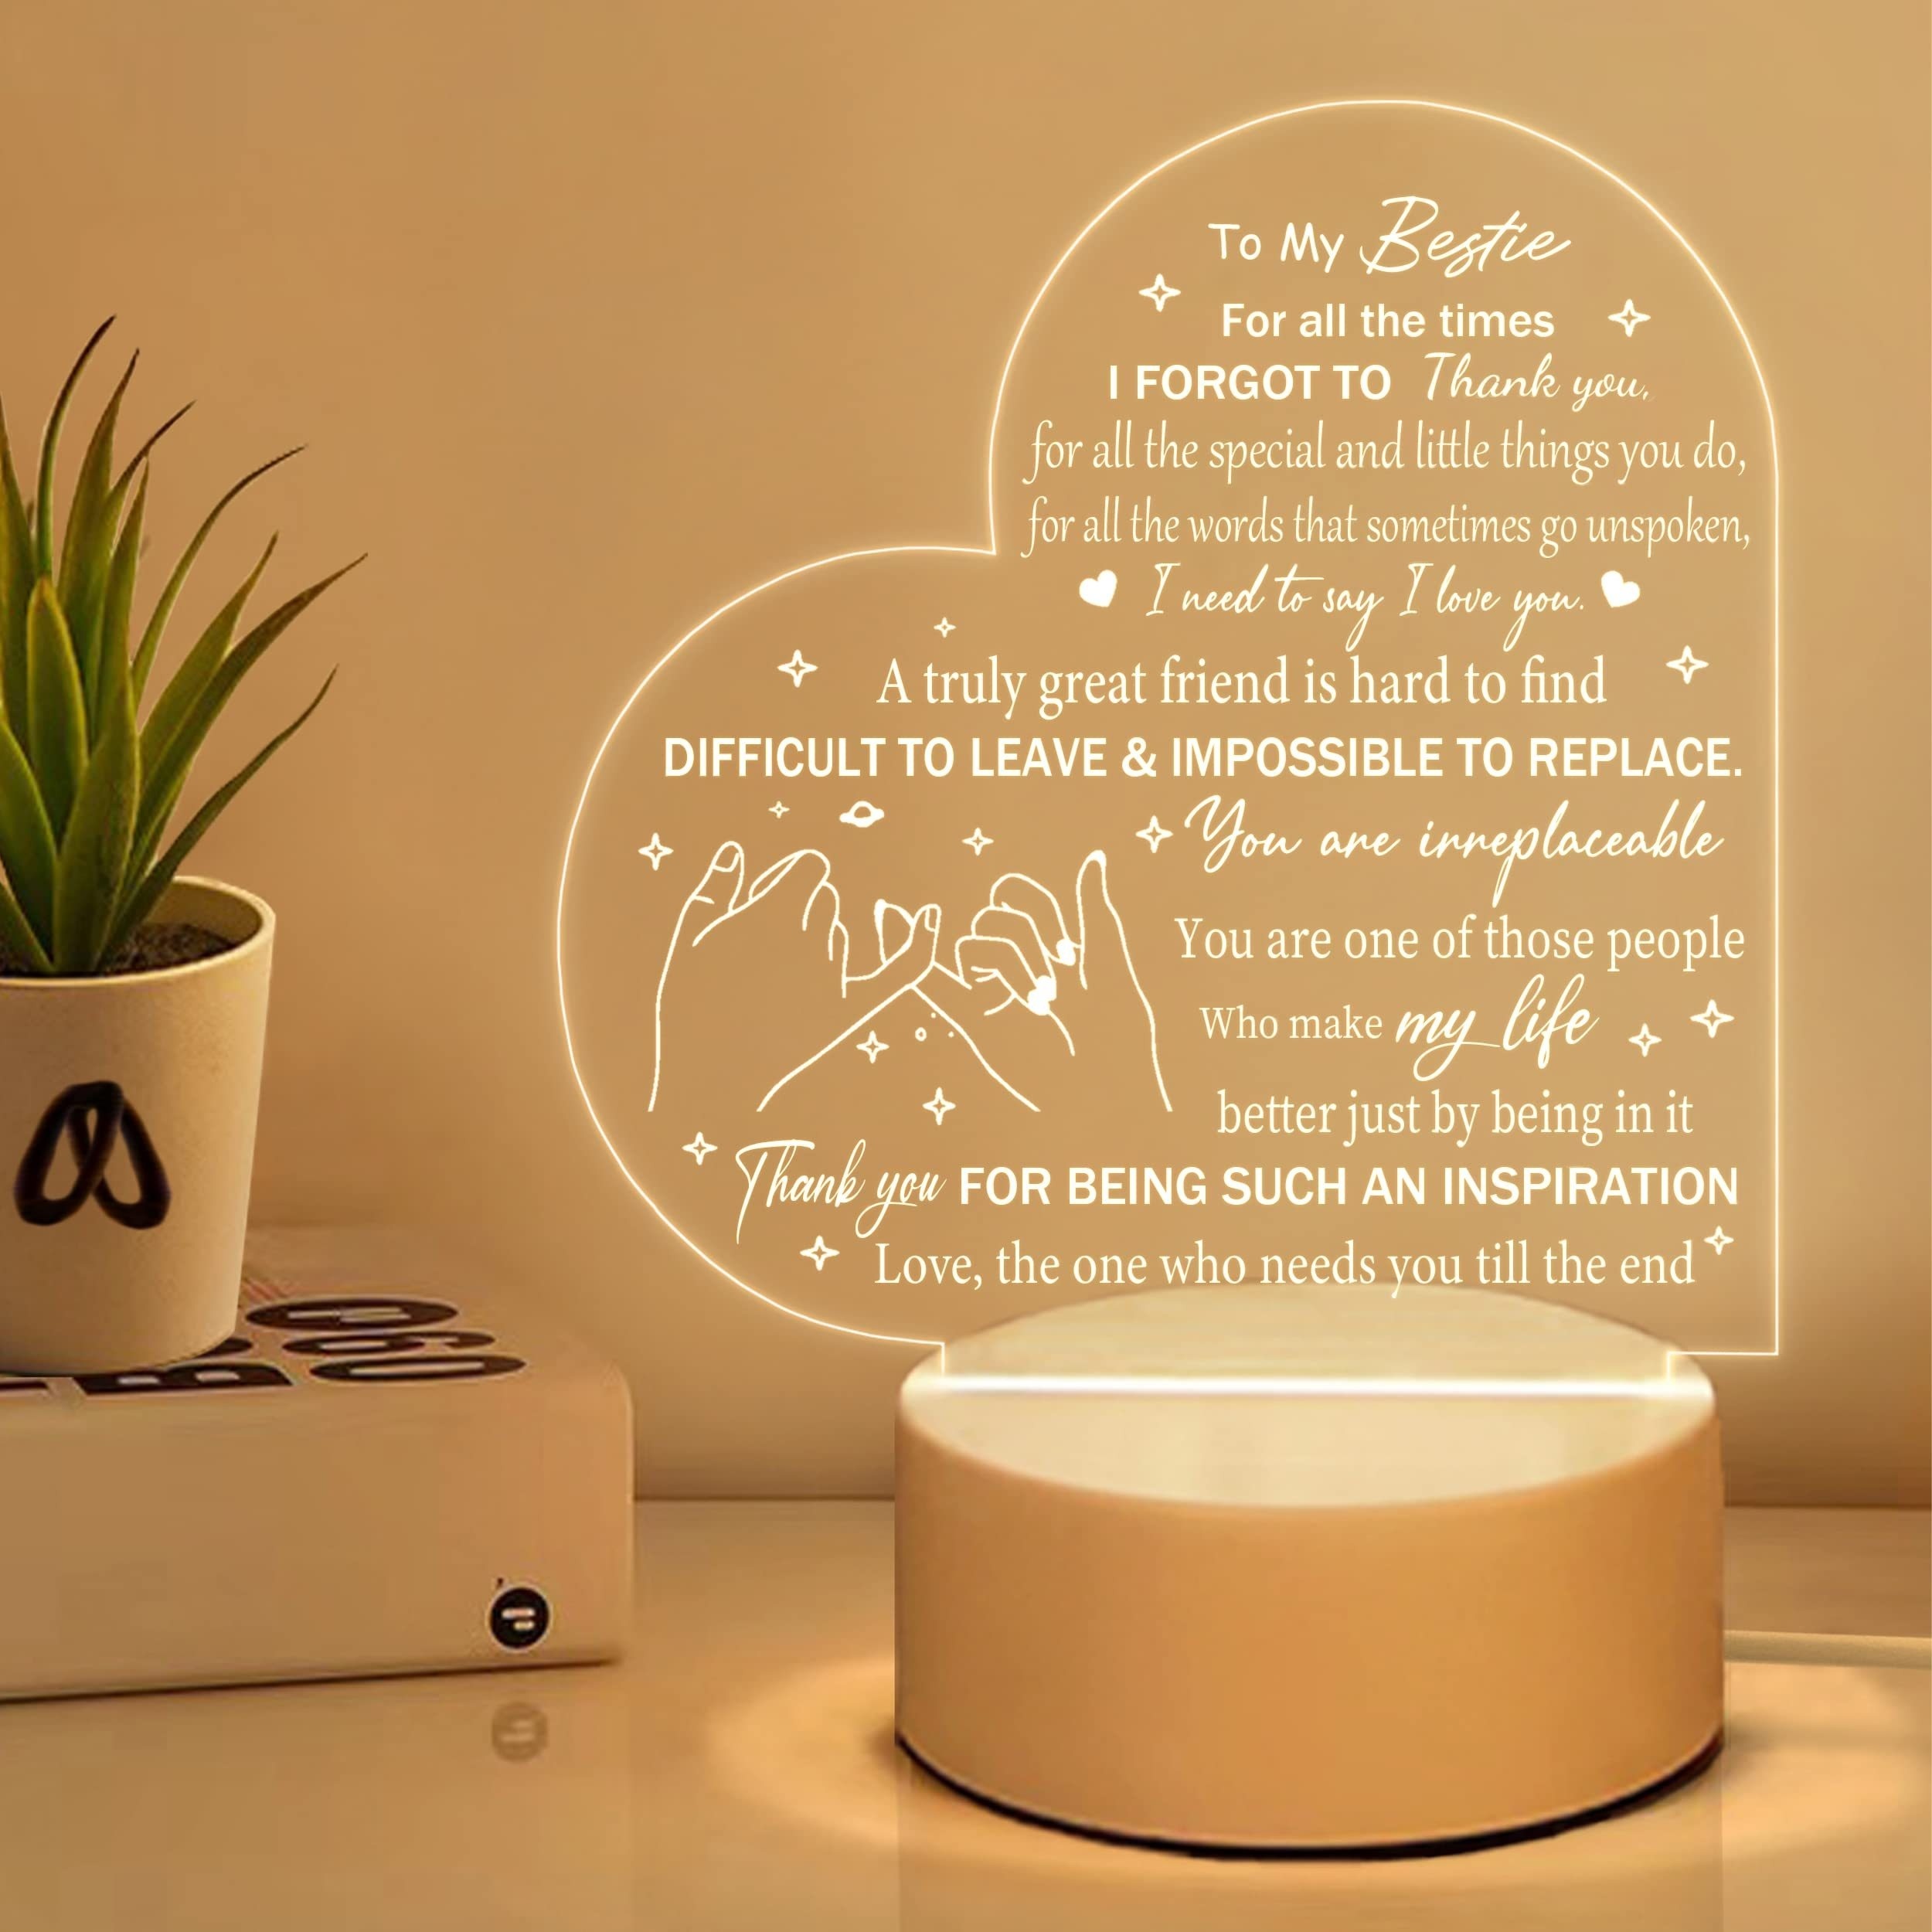  Gifts for Best Friend Women, Decorative Night Light Gifts, Best  Friends Gifts, Friendship Gifts for Women, Unique Bestfriend Gifts for  Birthday, Thanksgiving, Christmas, Valentines, NL13 : Home & Kitchen